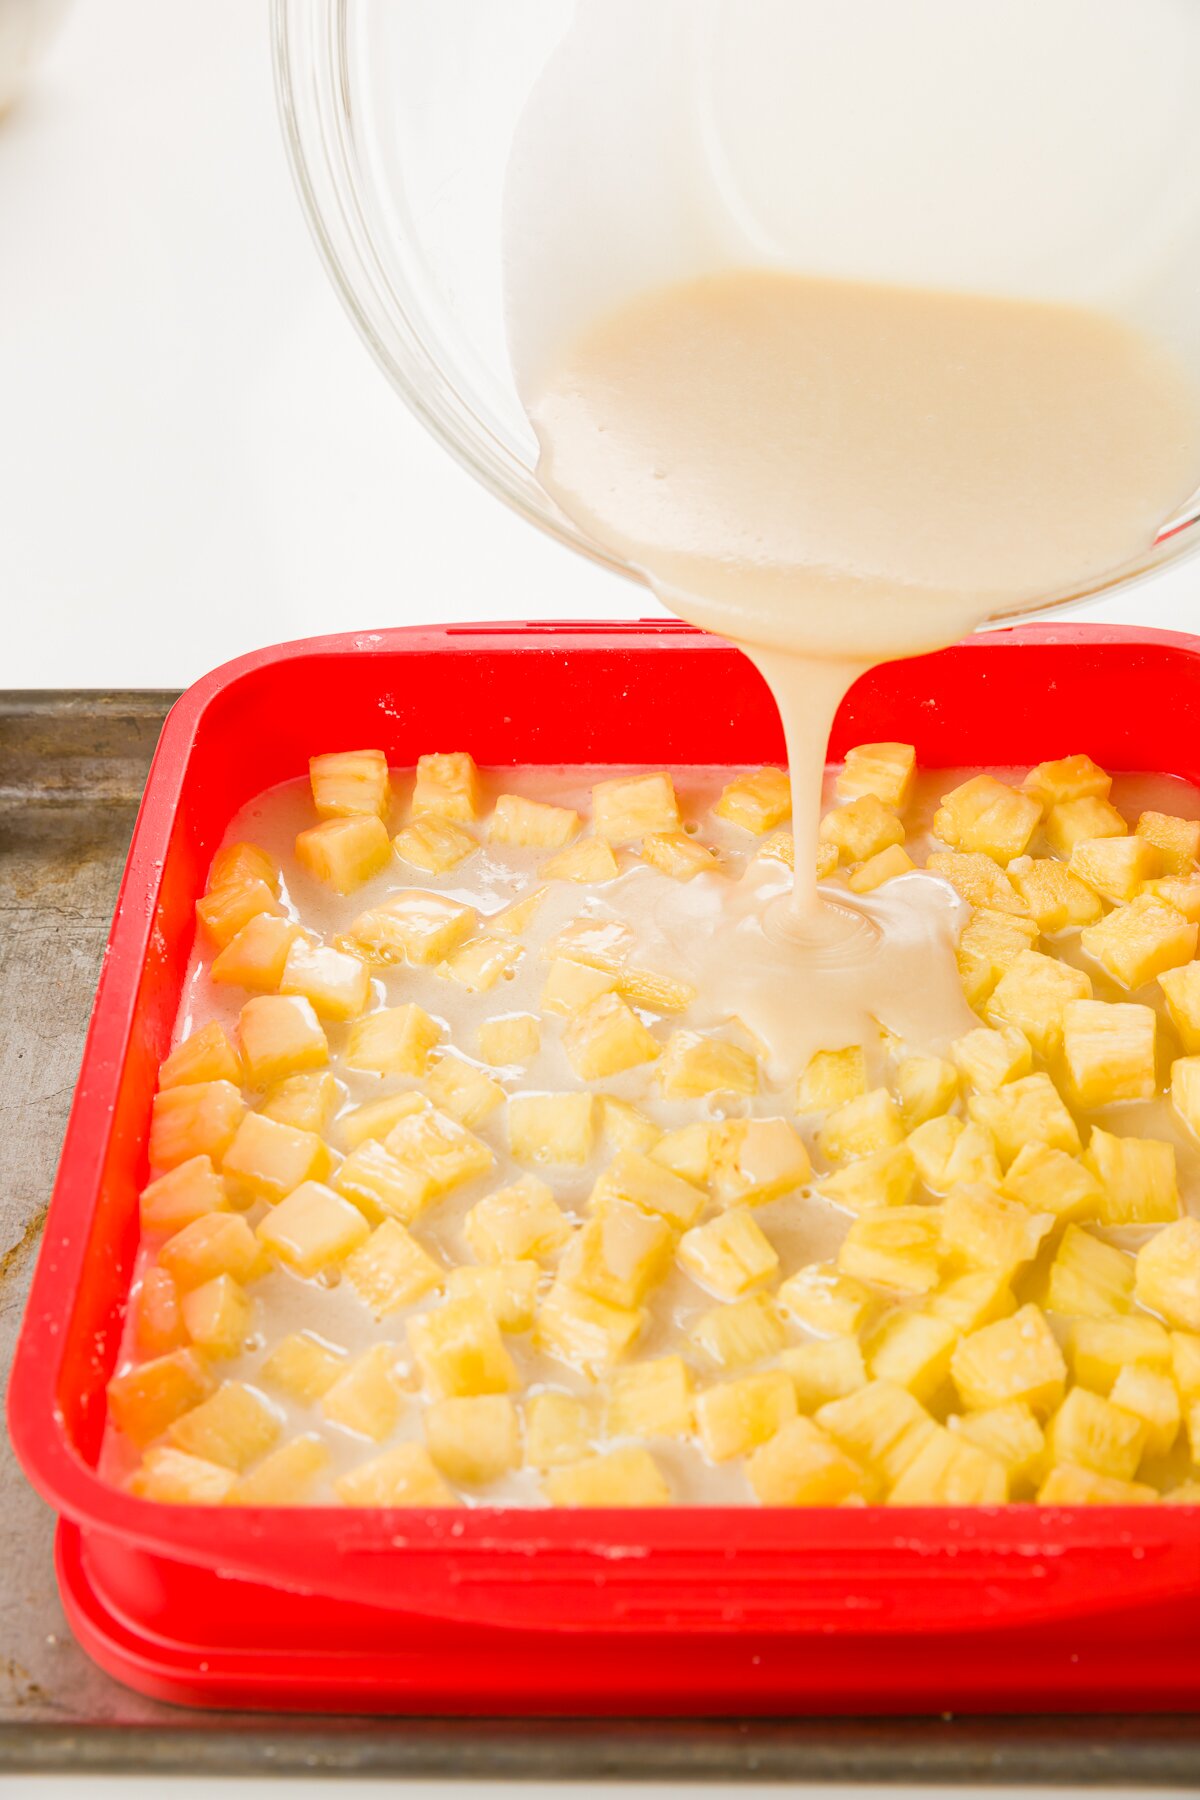 Pour batter from a glass bowl over baking dish with crust and pineapple